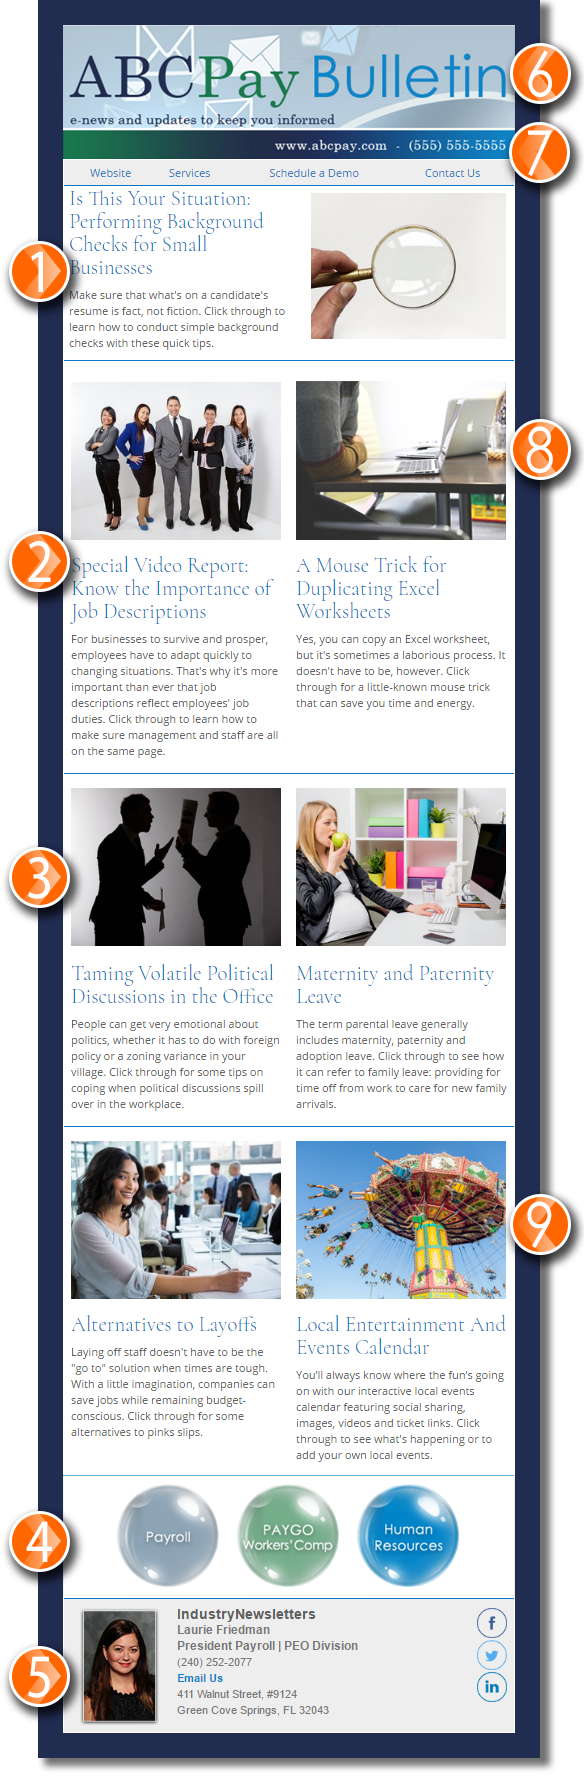 Tour An IndustryNewsletters Payroll Email Marketing Newsletter Sample